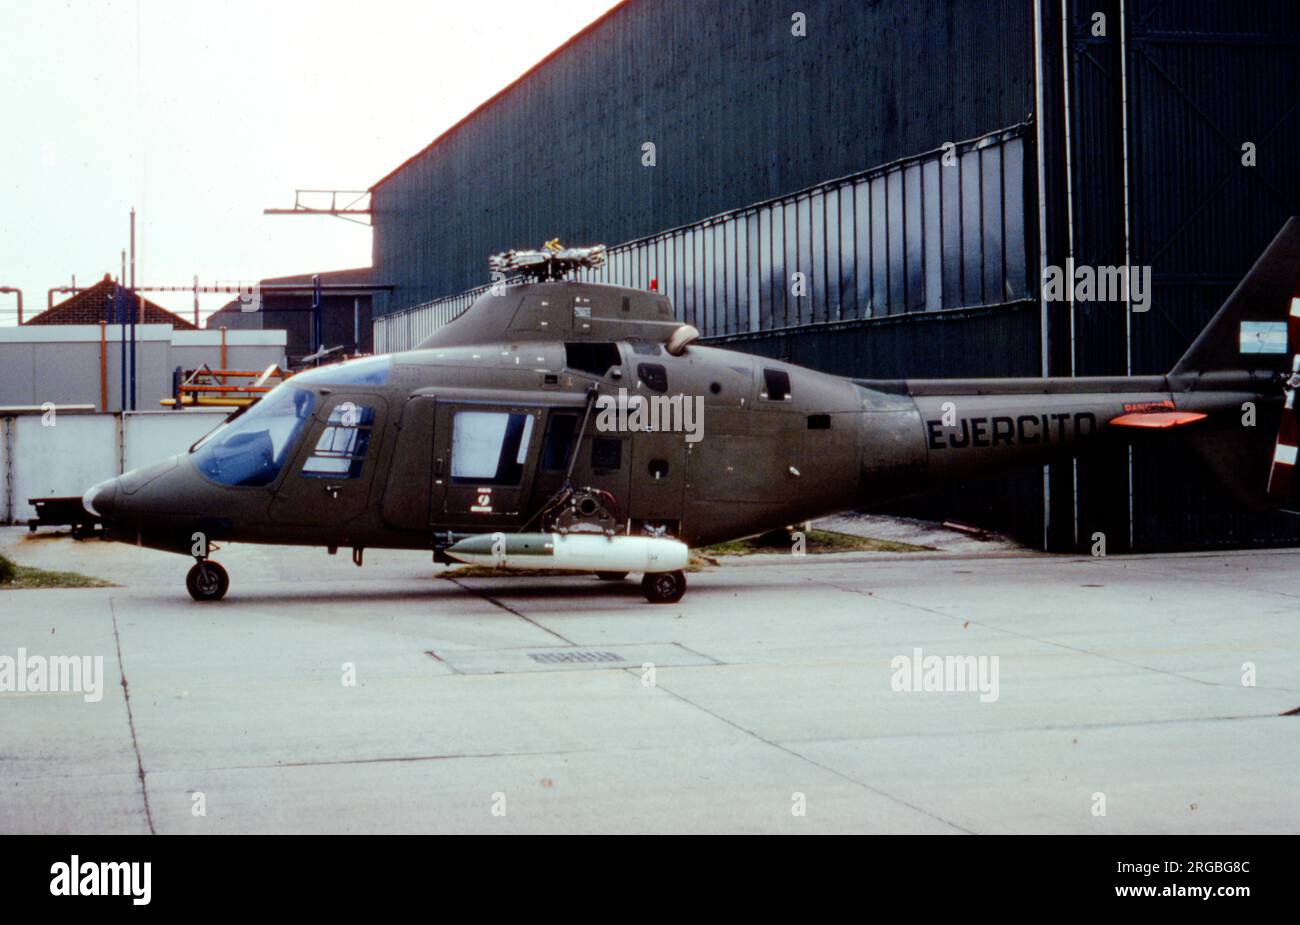 Agusta A.109 AE-331 - ZE411 (msn 7138), ex Argintine Army, captured at RAF Stanley in 1982 and seen at Royal Naval Air Station Yeovilton after repatriation to the UK, Later made airworthy and flown by 8 Flight Army Air Corps at Netheravon. Stock Photo